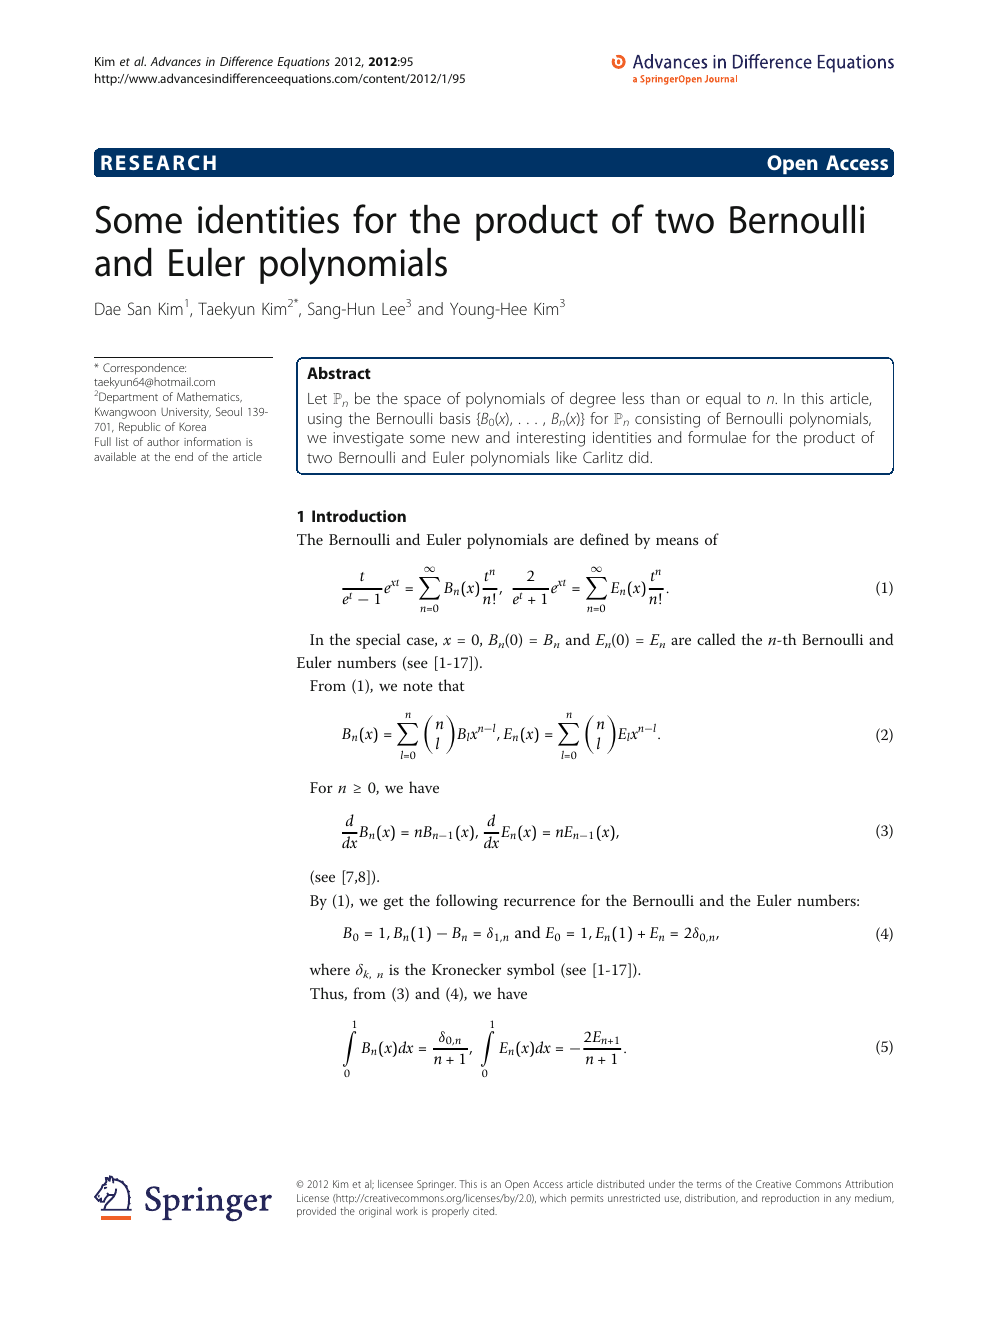 Some Identities For The Product Of Two Bernoulli And Euler Polynomials Topic Of Research Paper In Mathematics Download Scholarly Article Pdf And Read For Free On Cyberleninka Open Science Hub